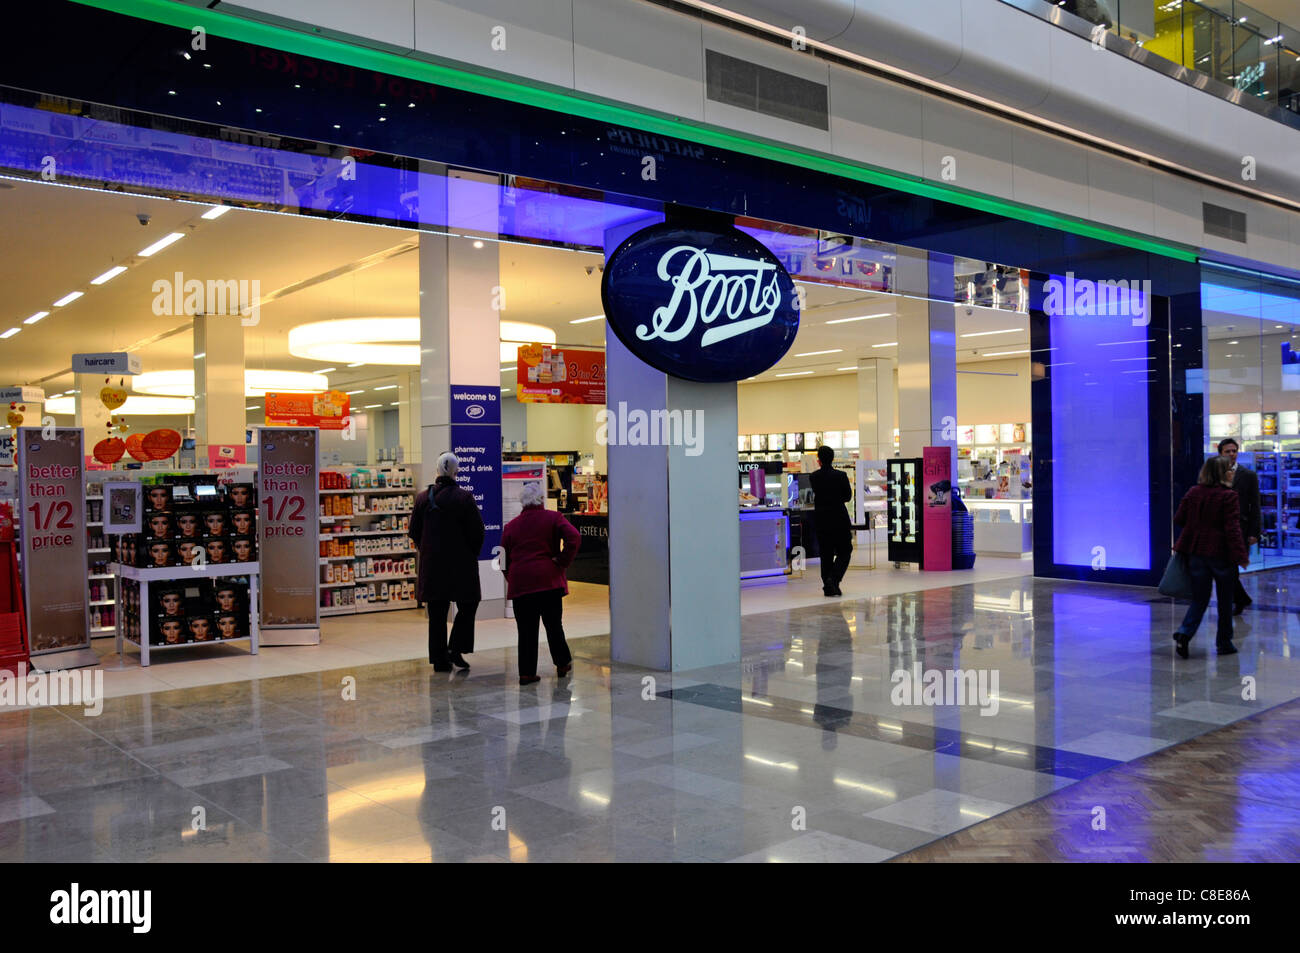 Boots Shop Front High Resolution Stock Photography and Images - Alamy